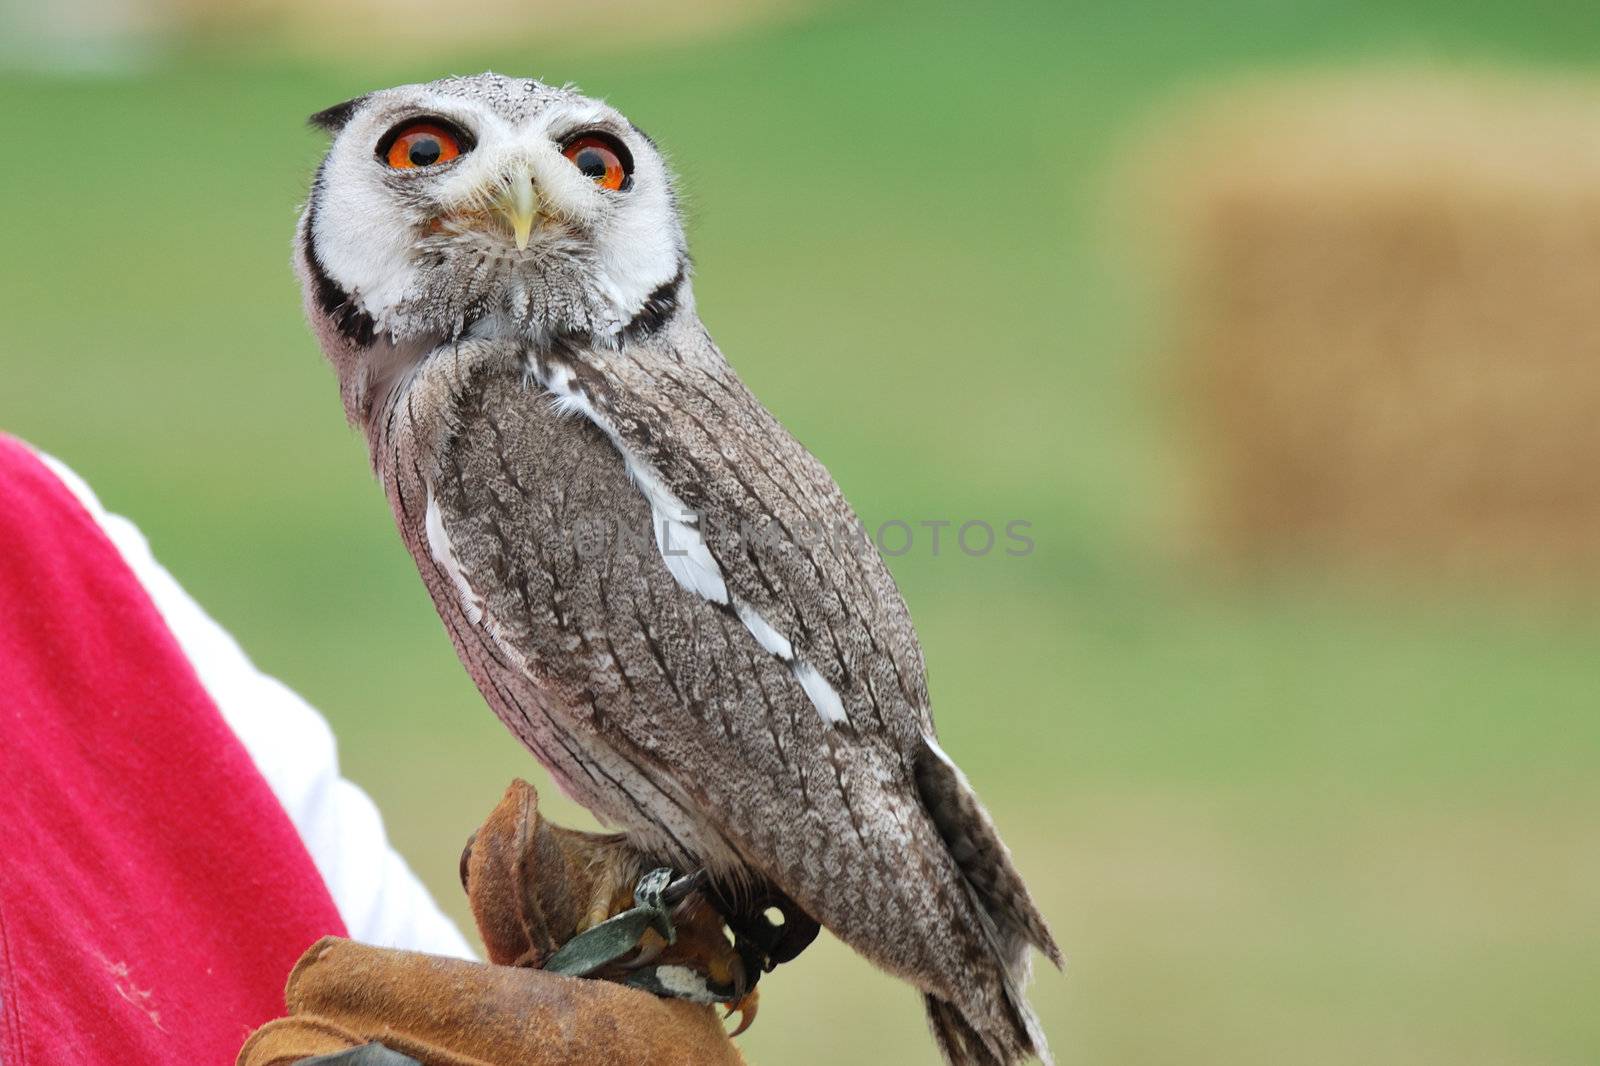 young owl perched on leather glove